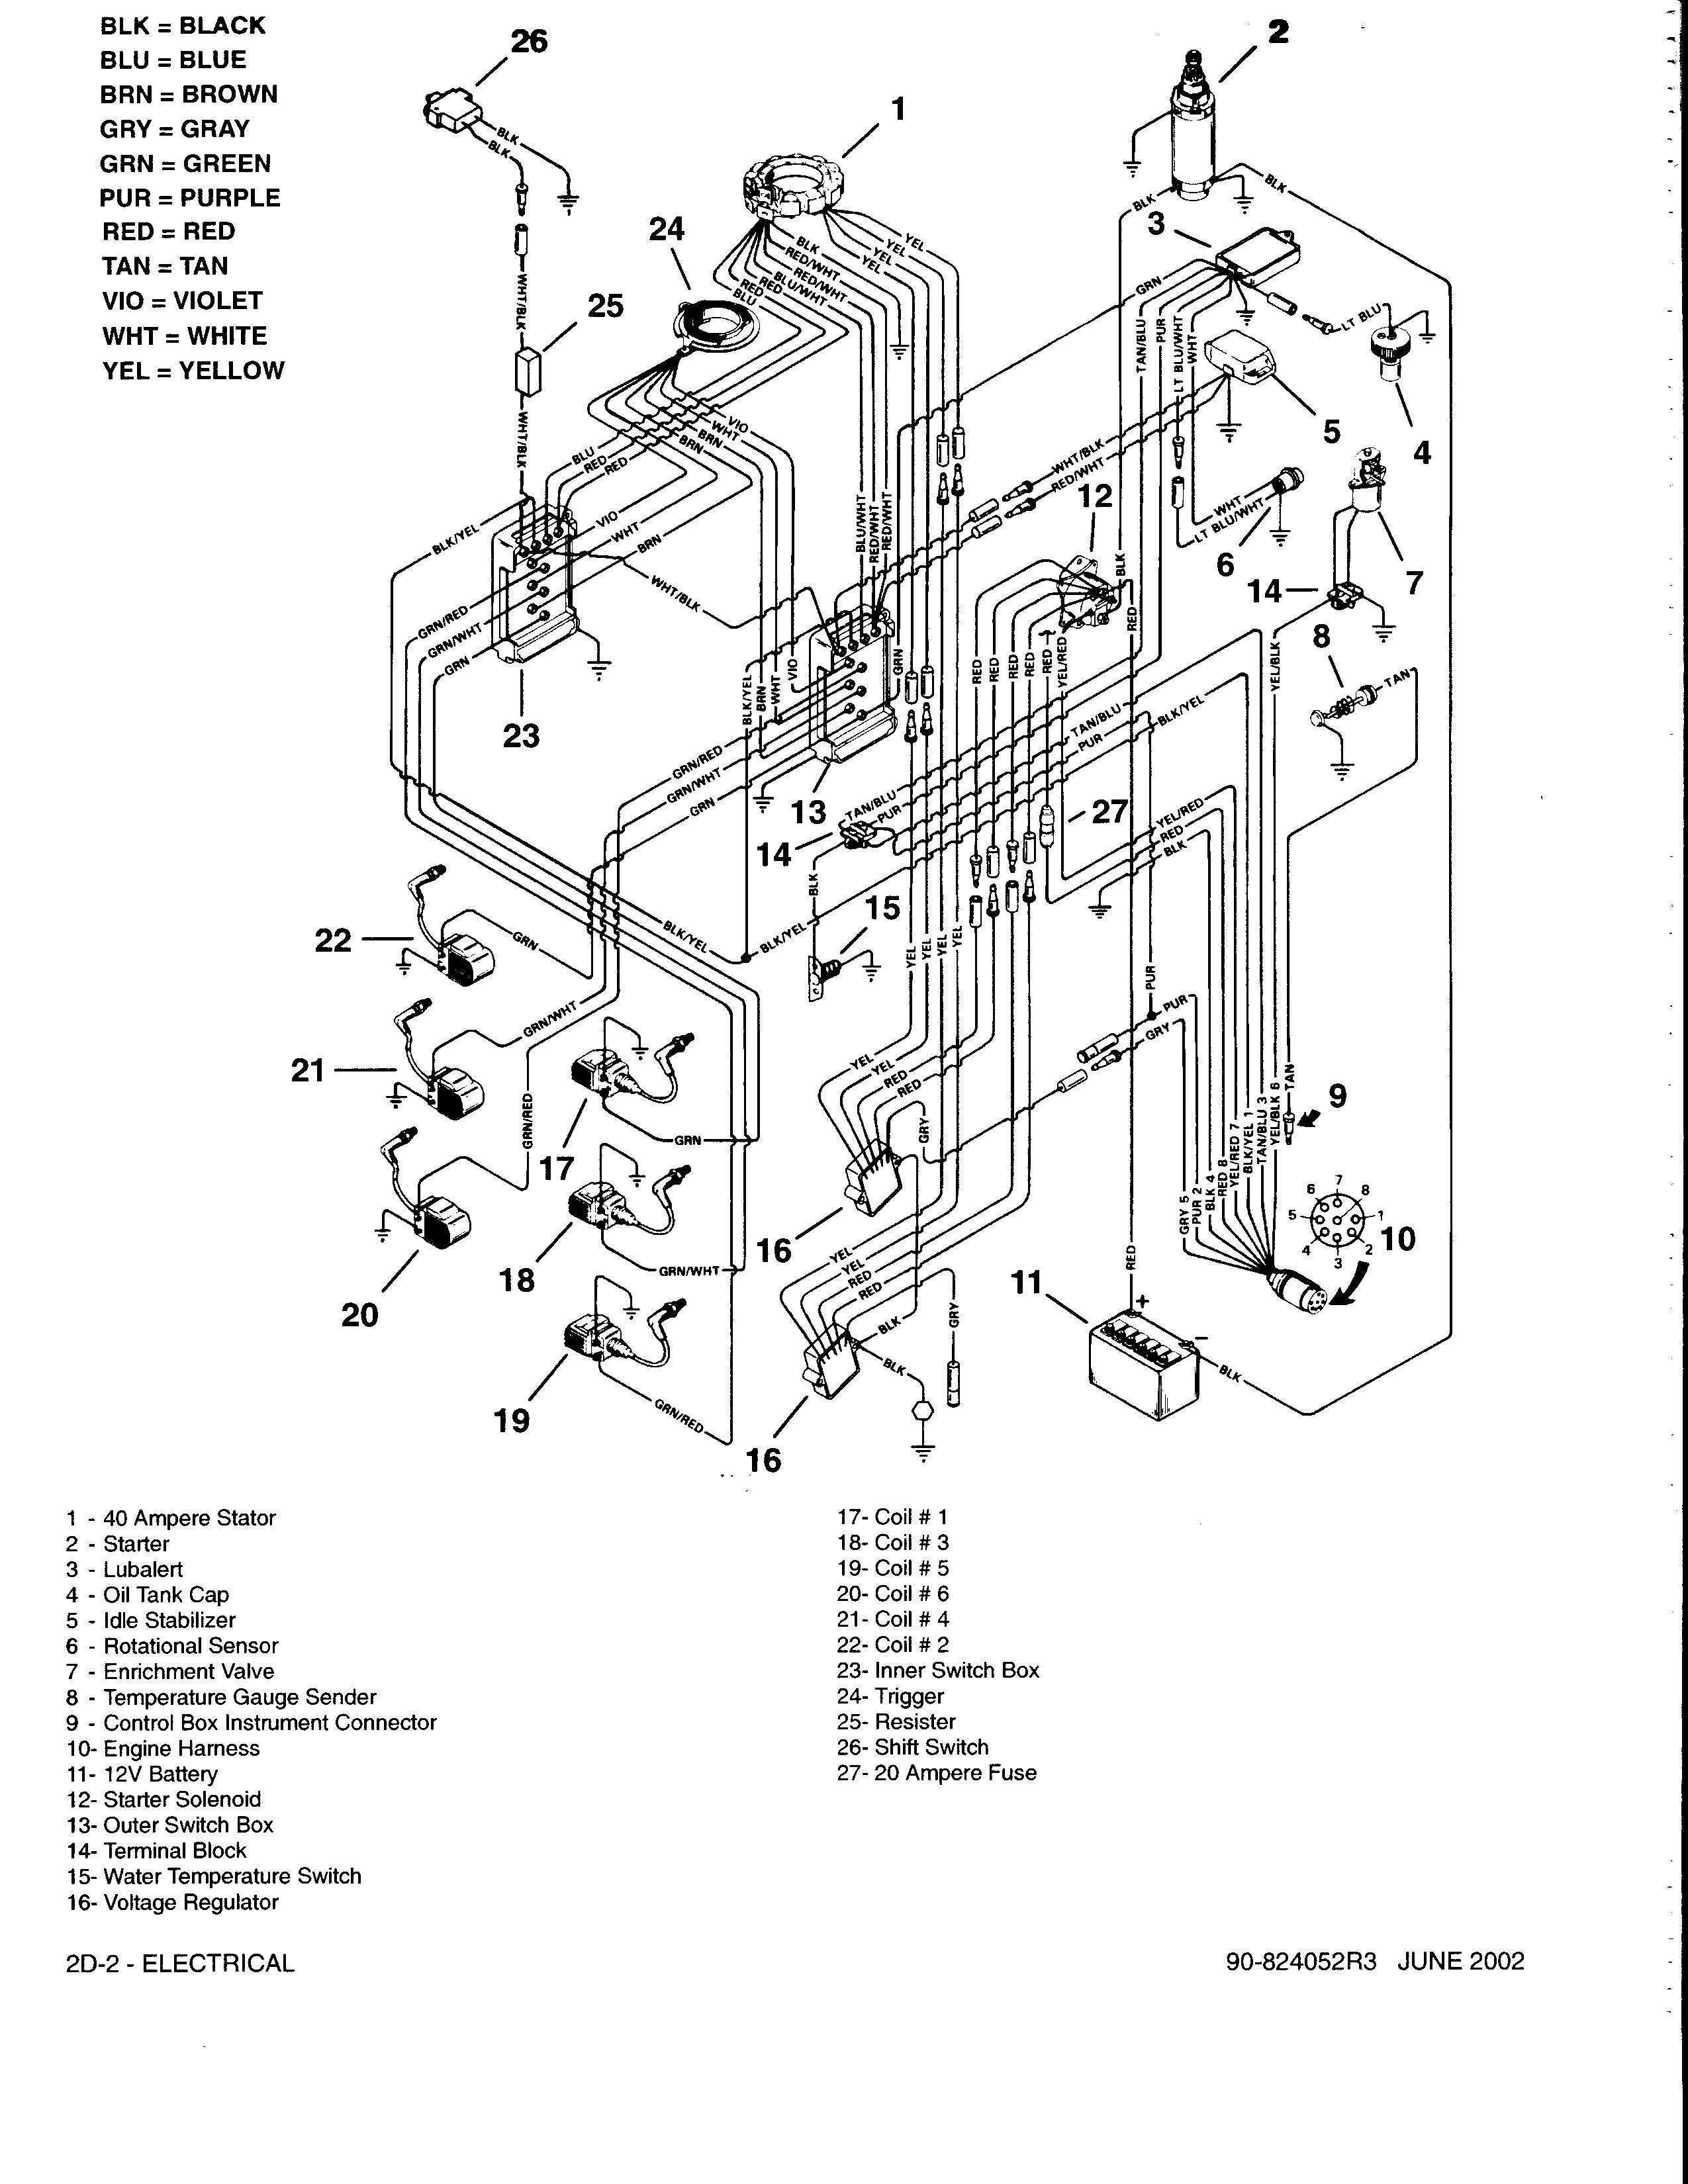 John Deere Electrical Bo Wiring Systems New Simple Electrical Wiring Diagram Wiringdiagram Of John Deere Electrical Bo Wiring Systems